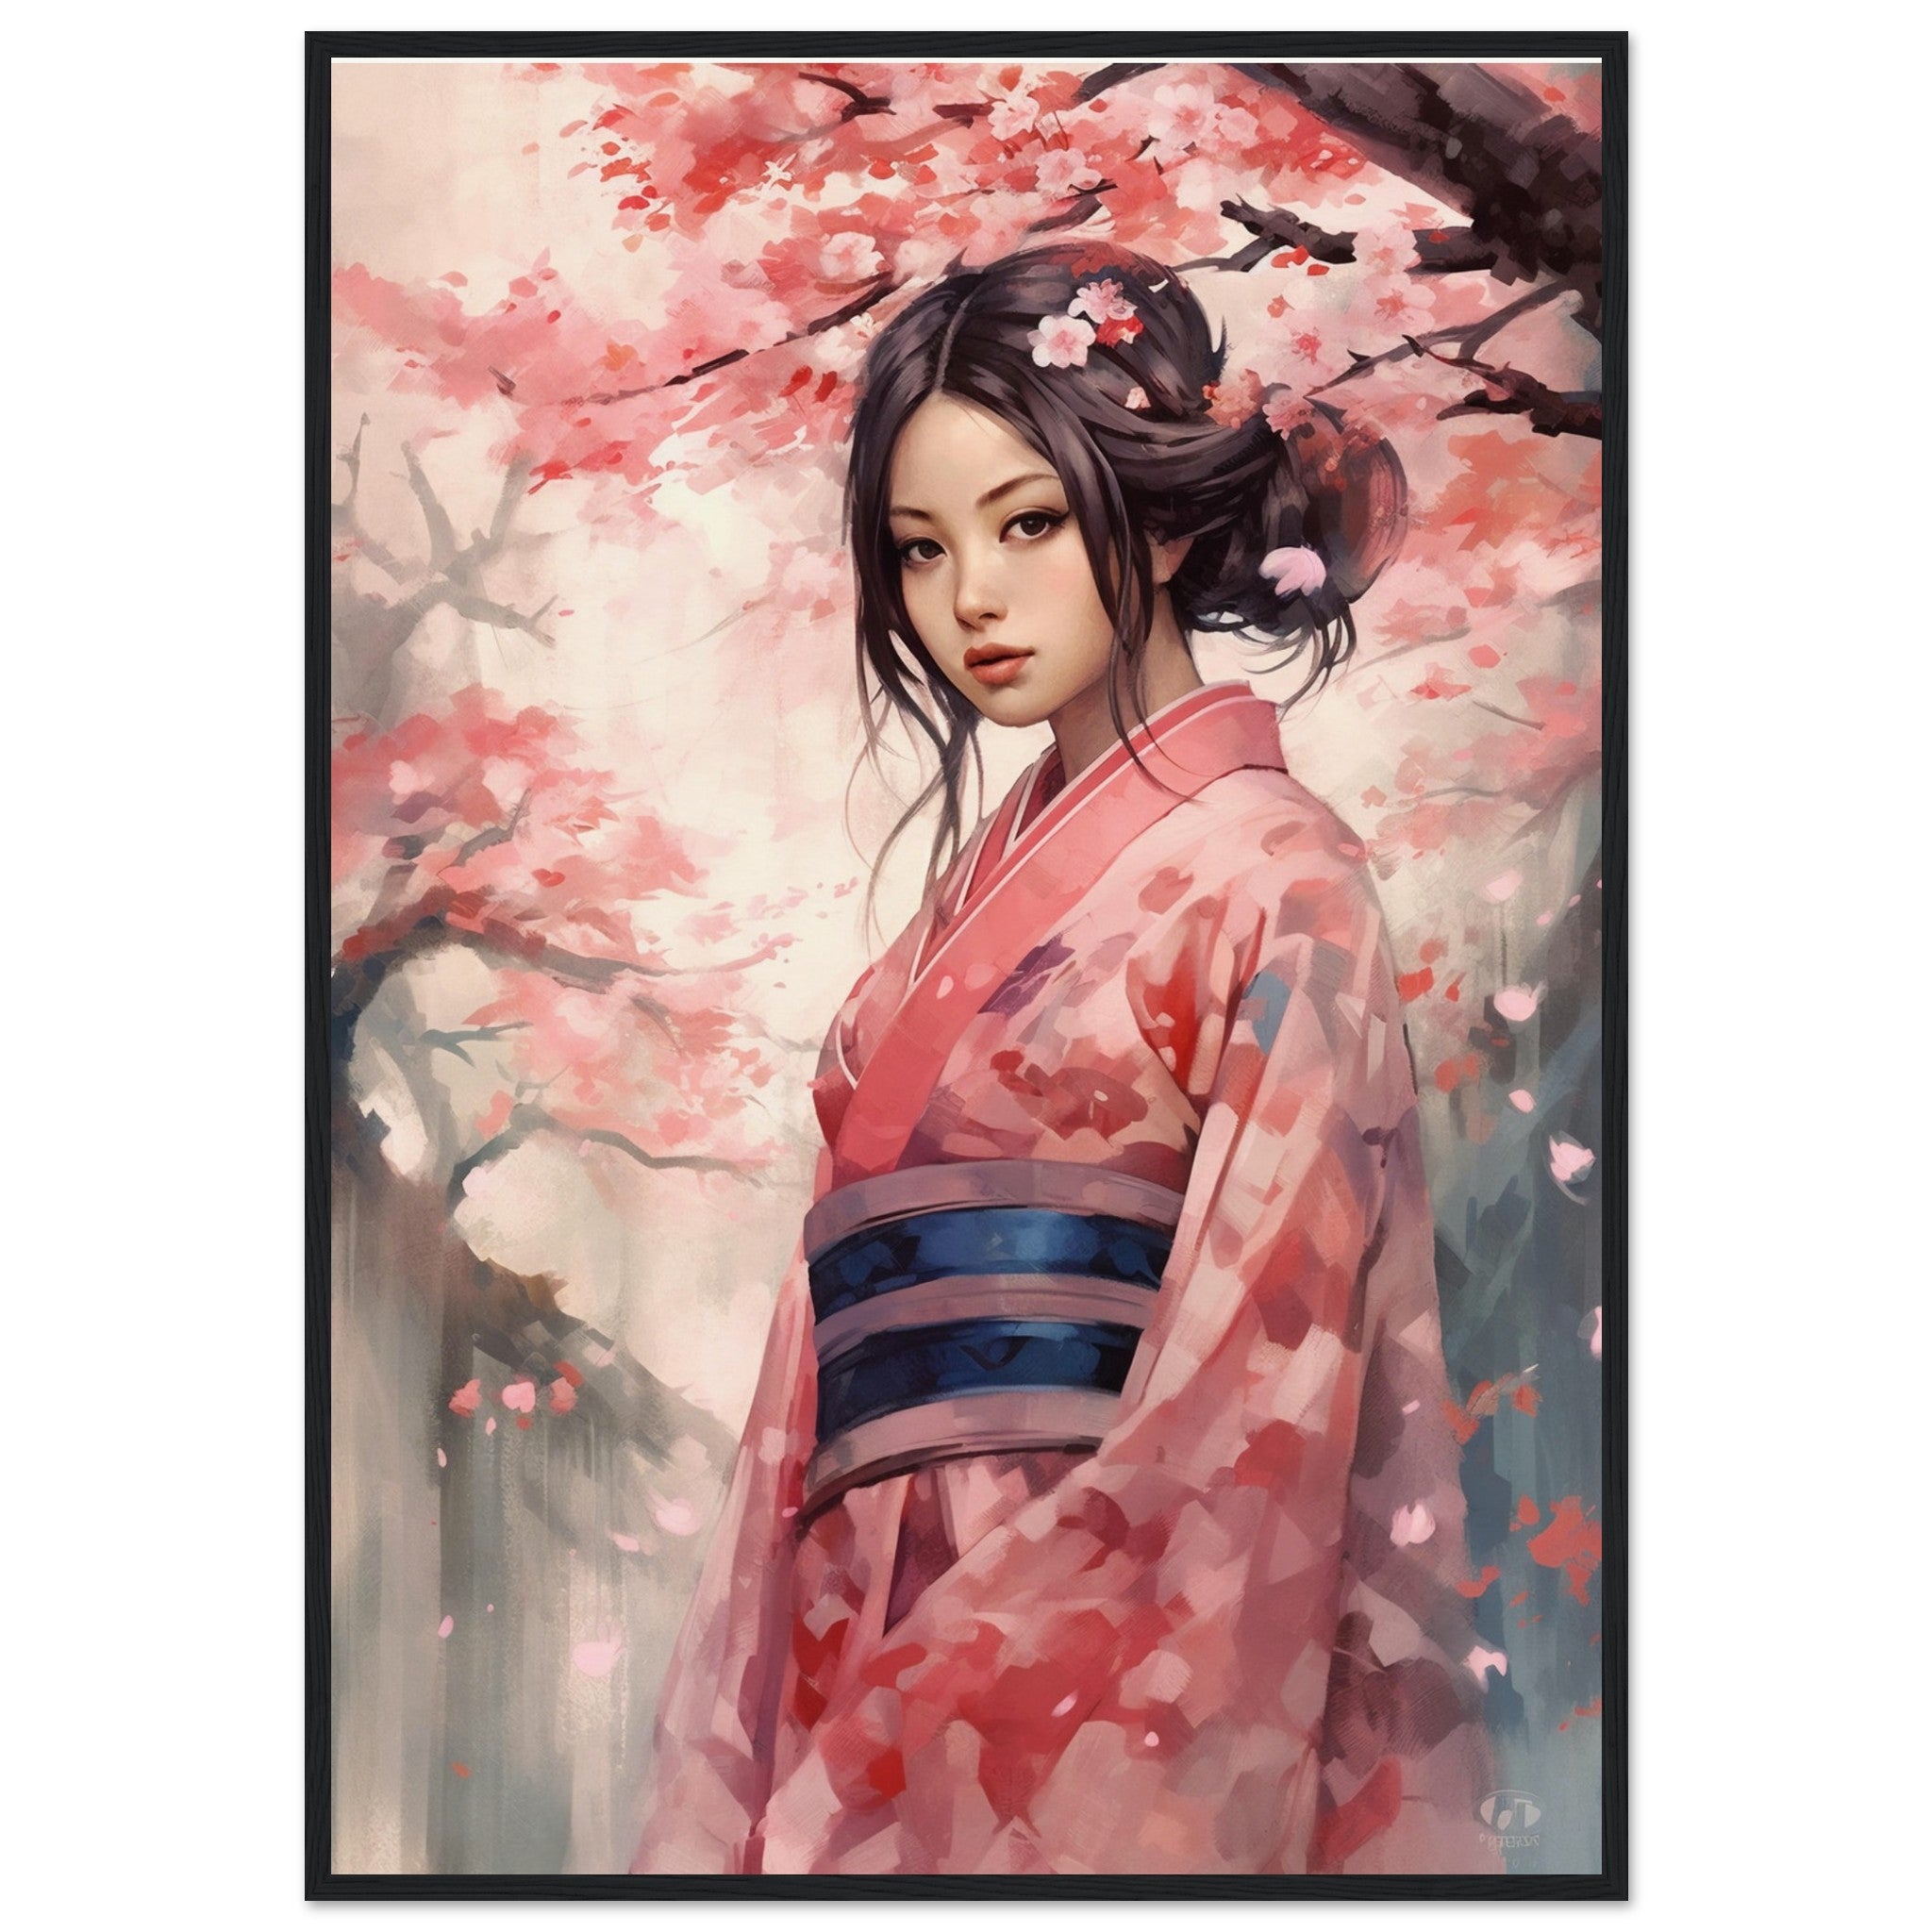 Japanese girl surrounded with cherry blossoms - immersiarts